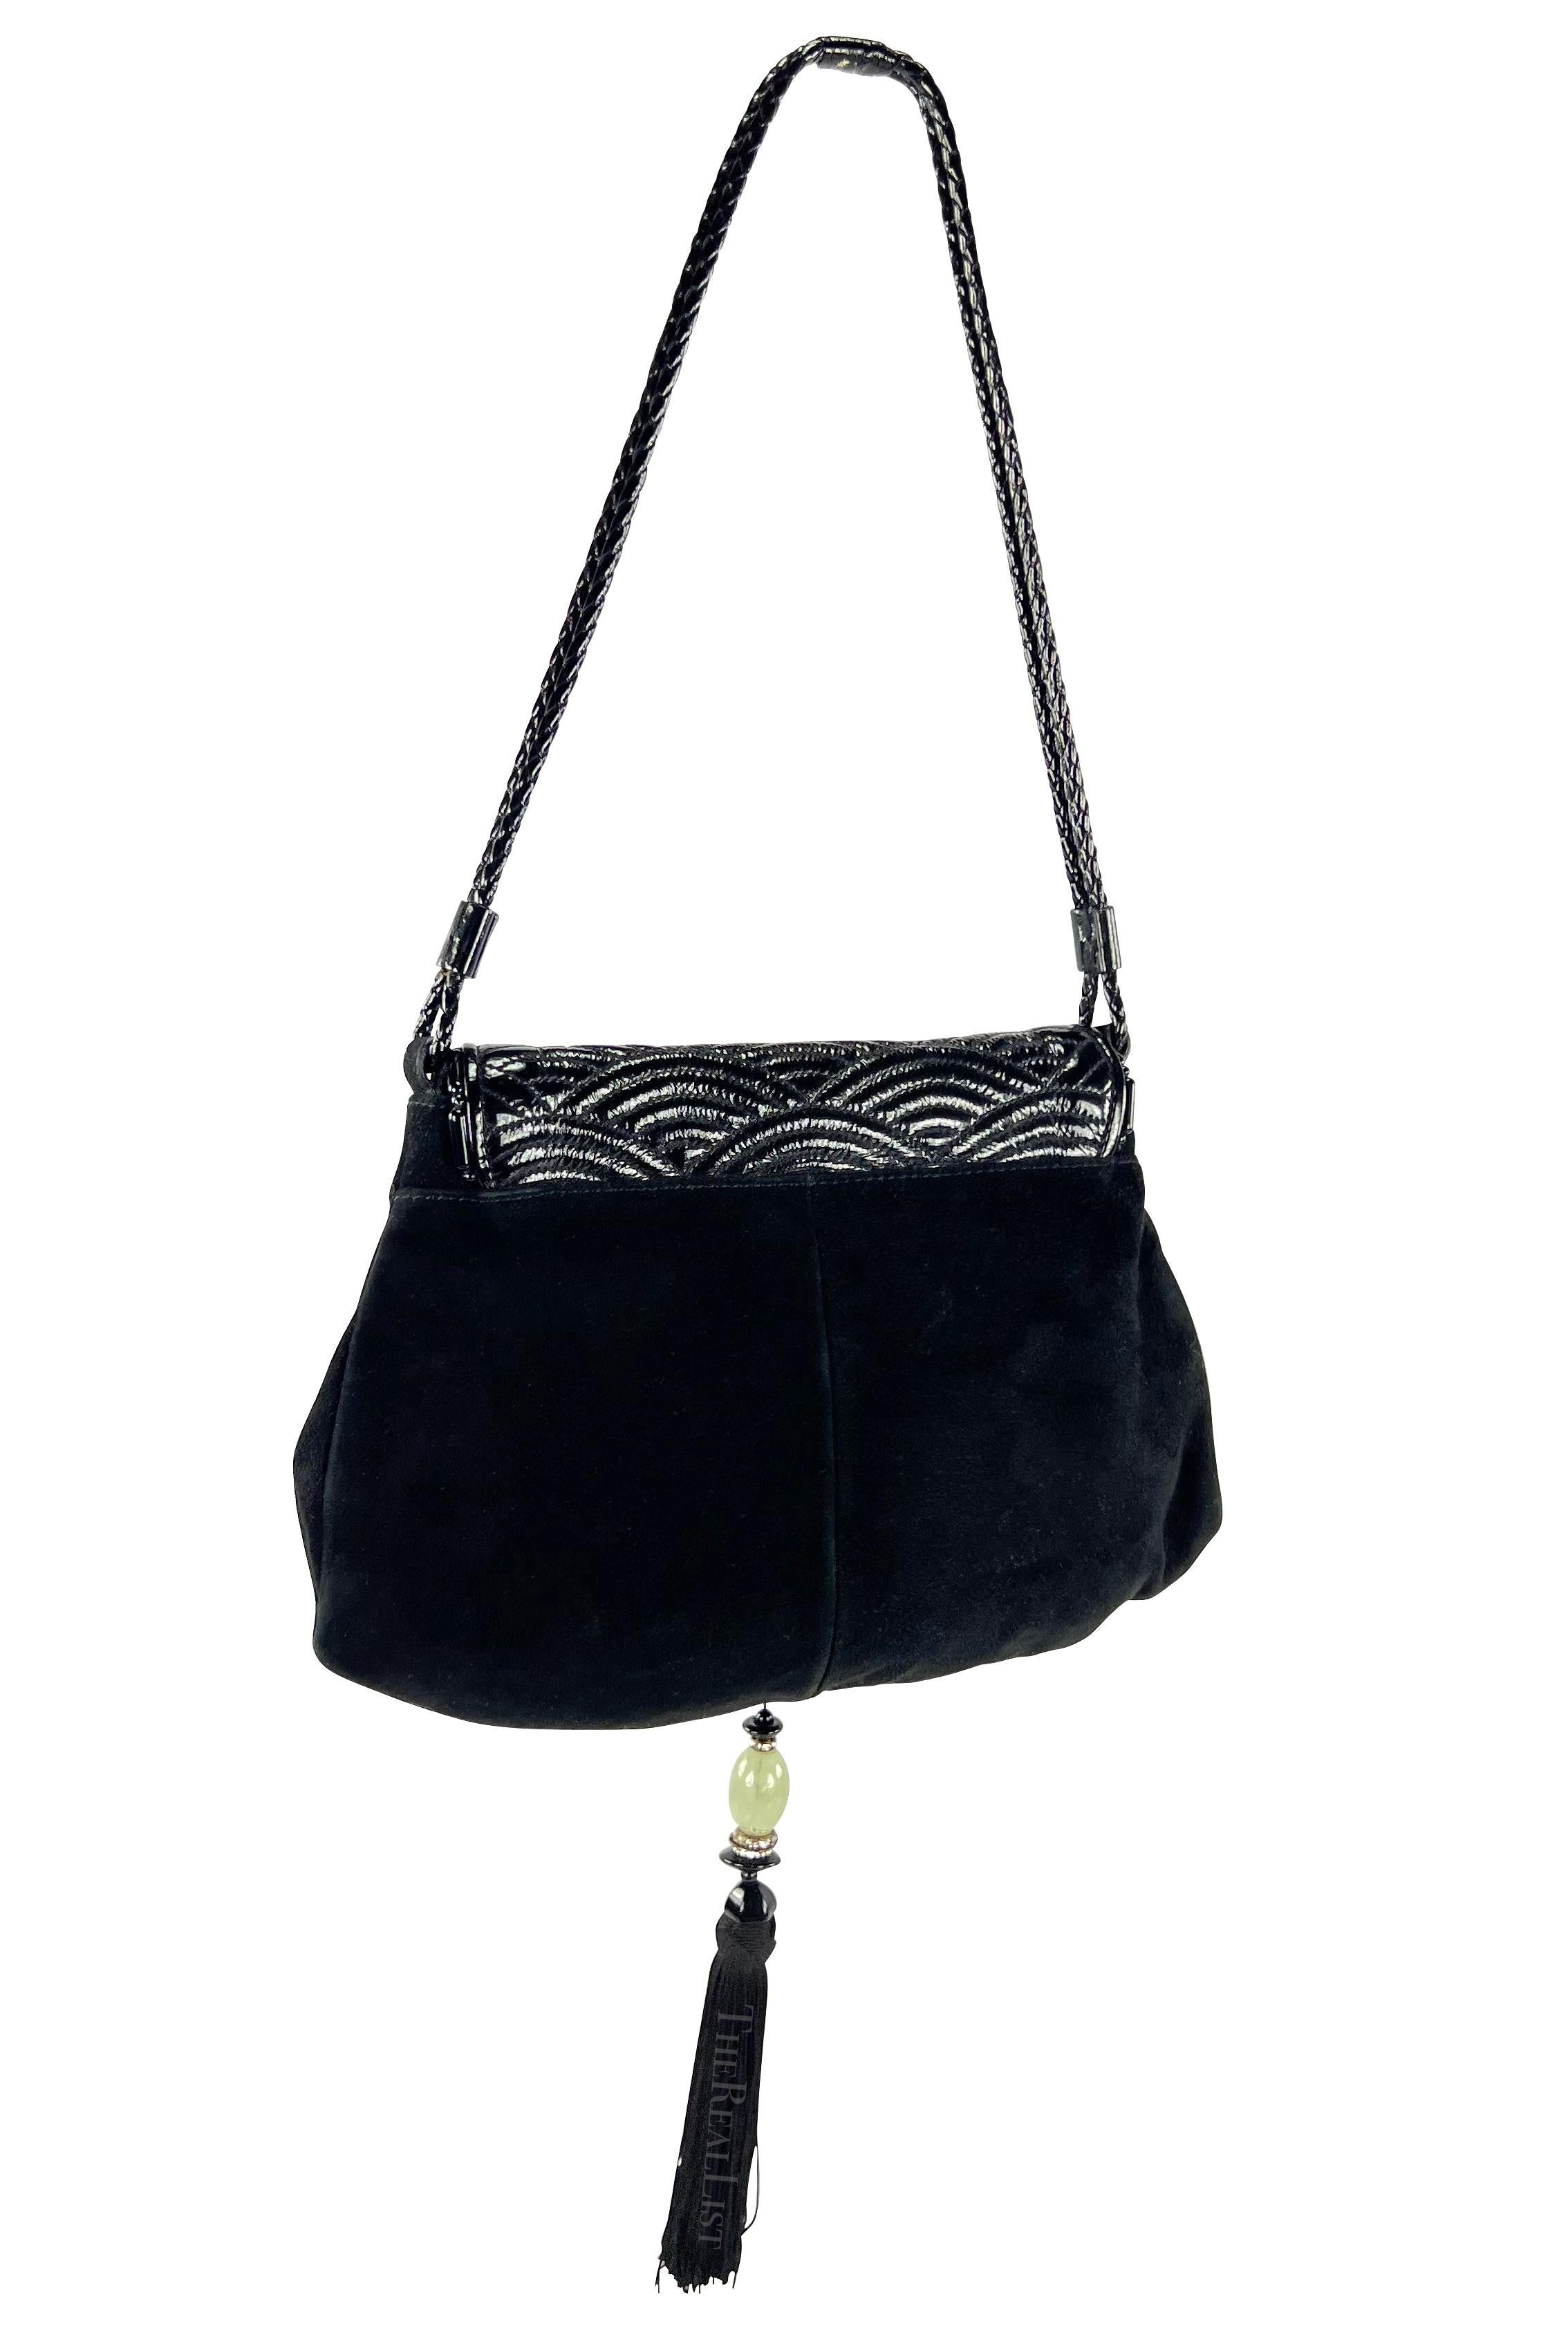 F/W 2004 Yves Saint Laurent by Tom Ford Chinoiserie Suede Tassel Jade Bead Bag For Sale 1